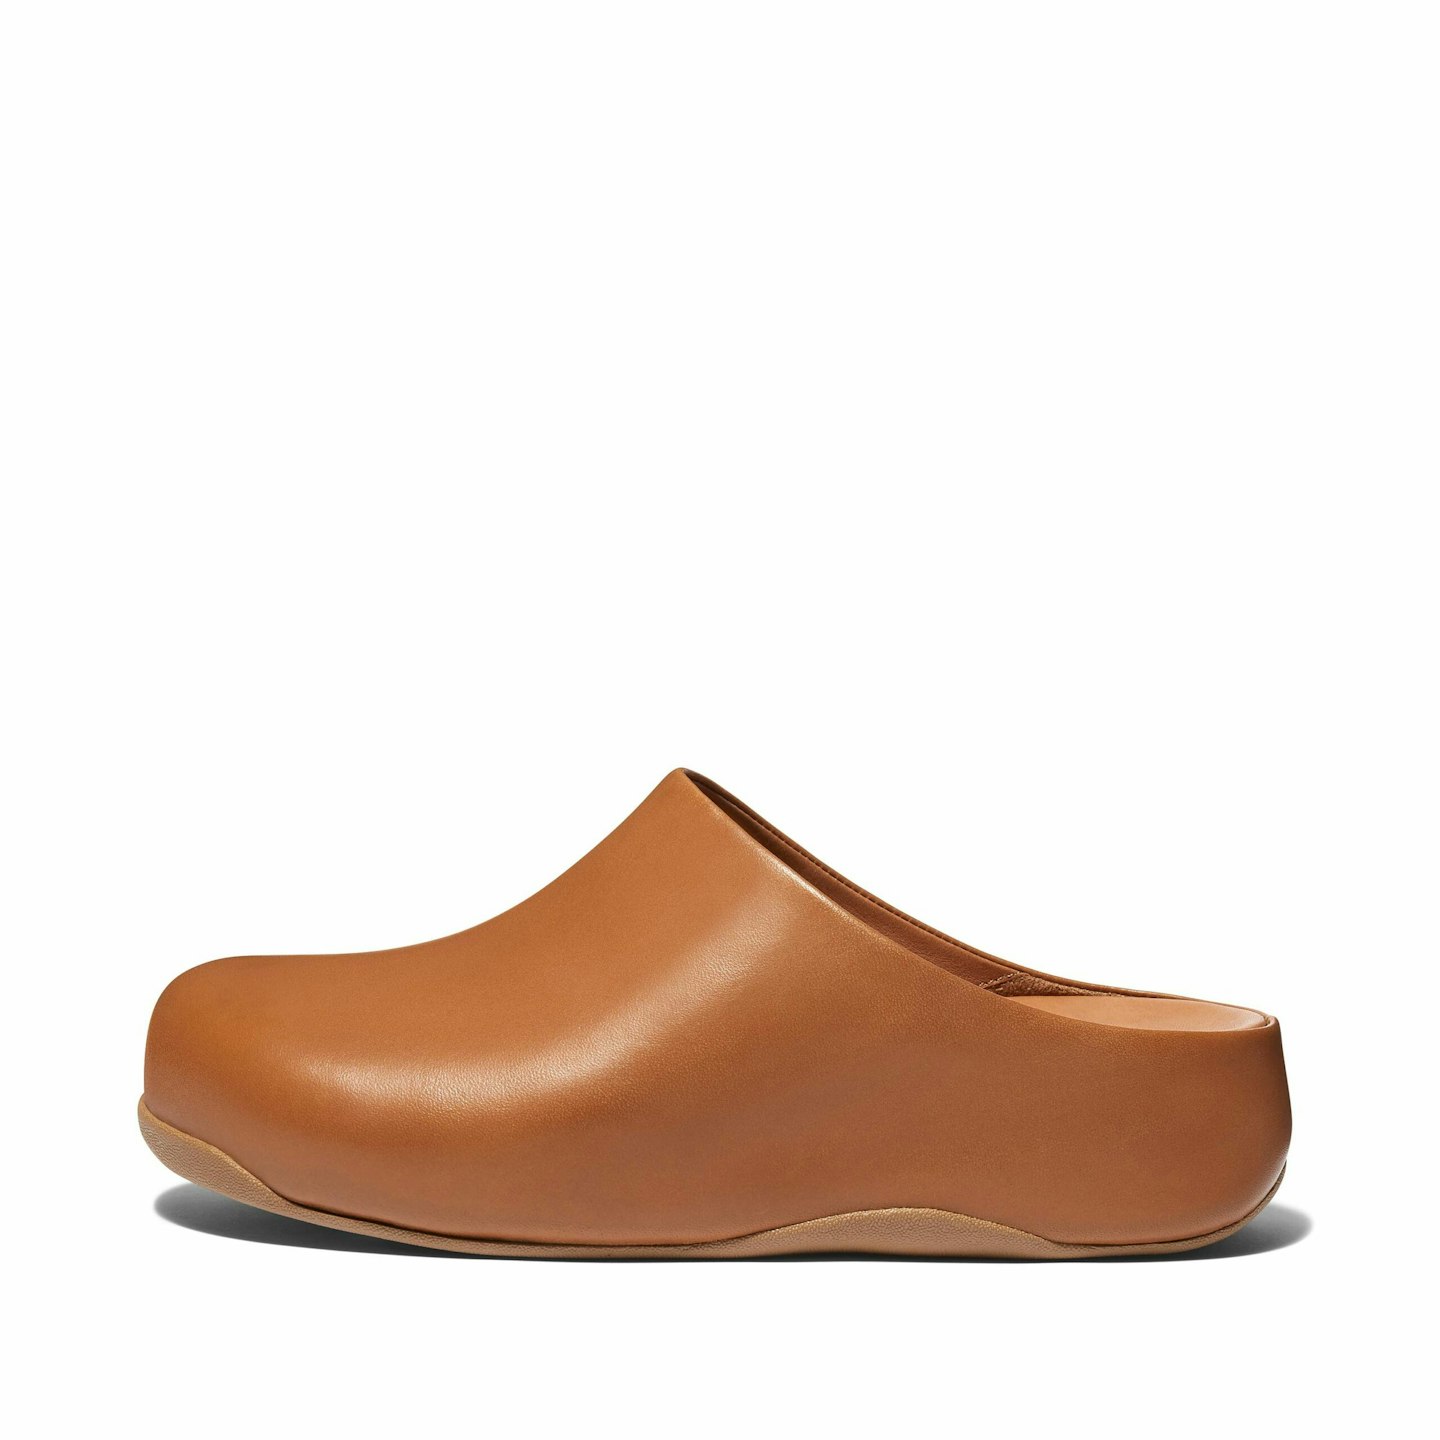 FitFlop, Shuv Leather Clogs